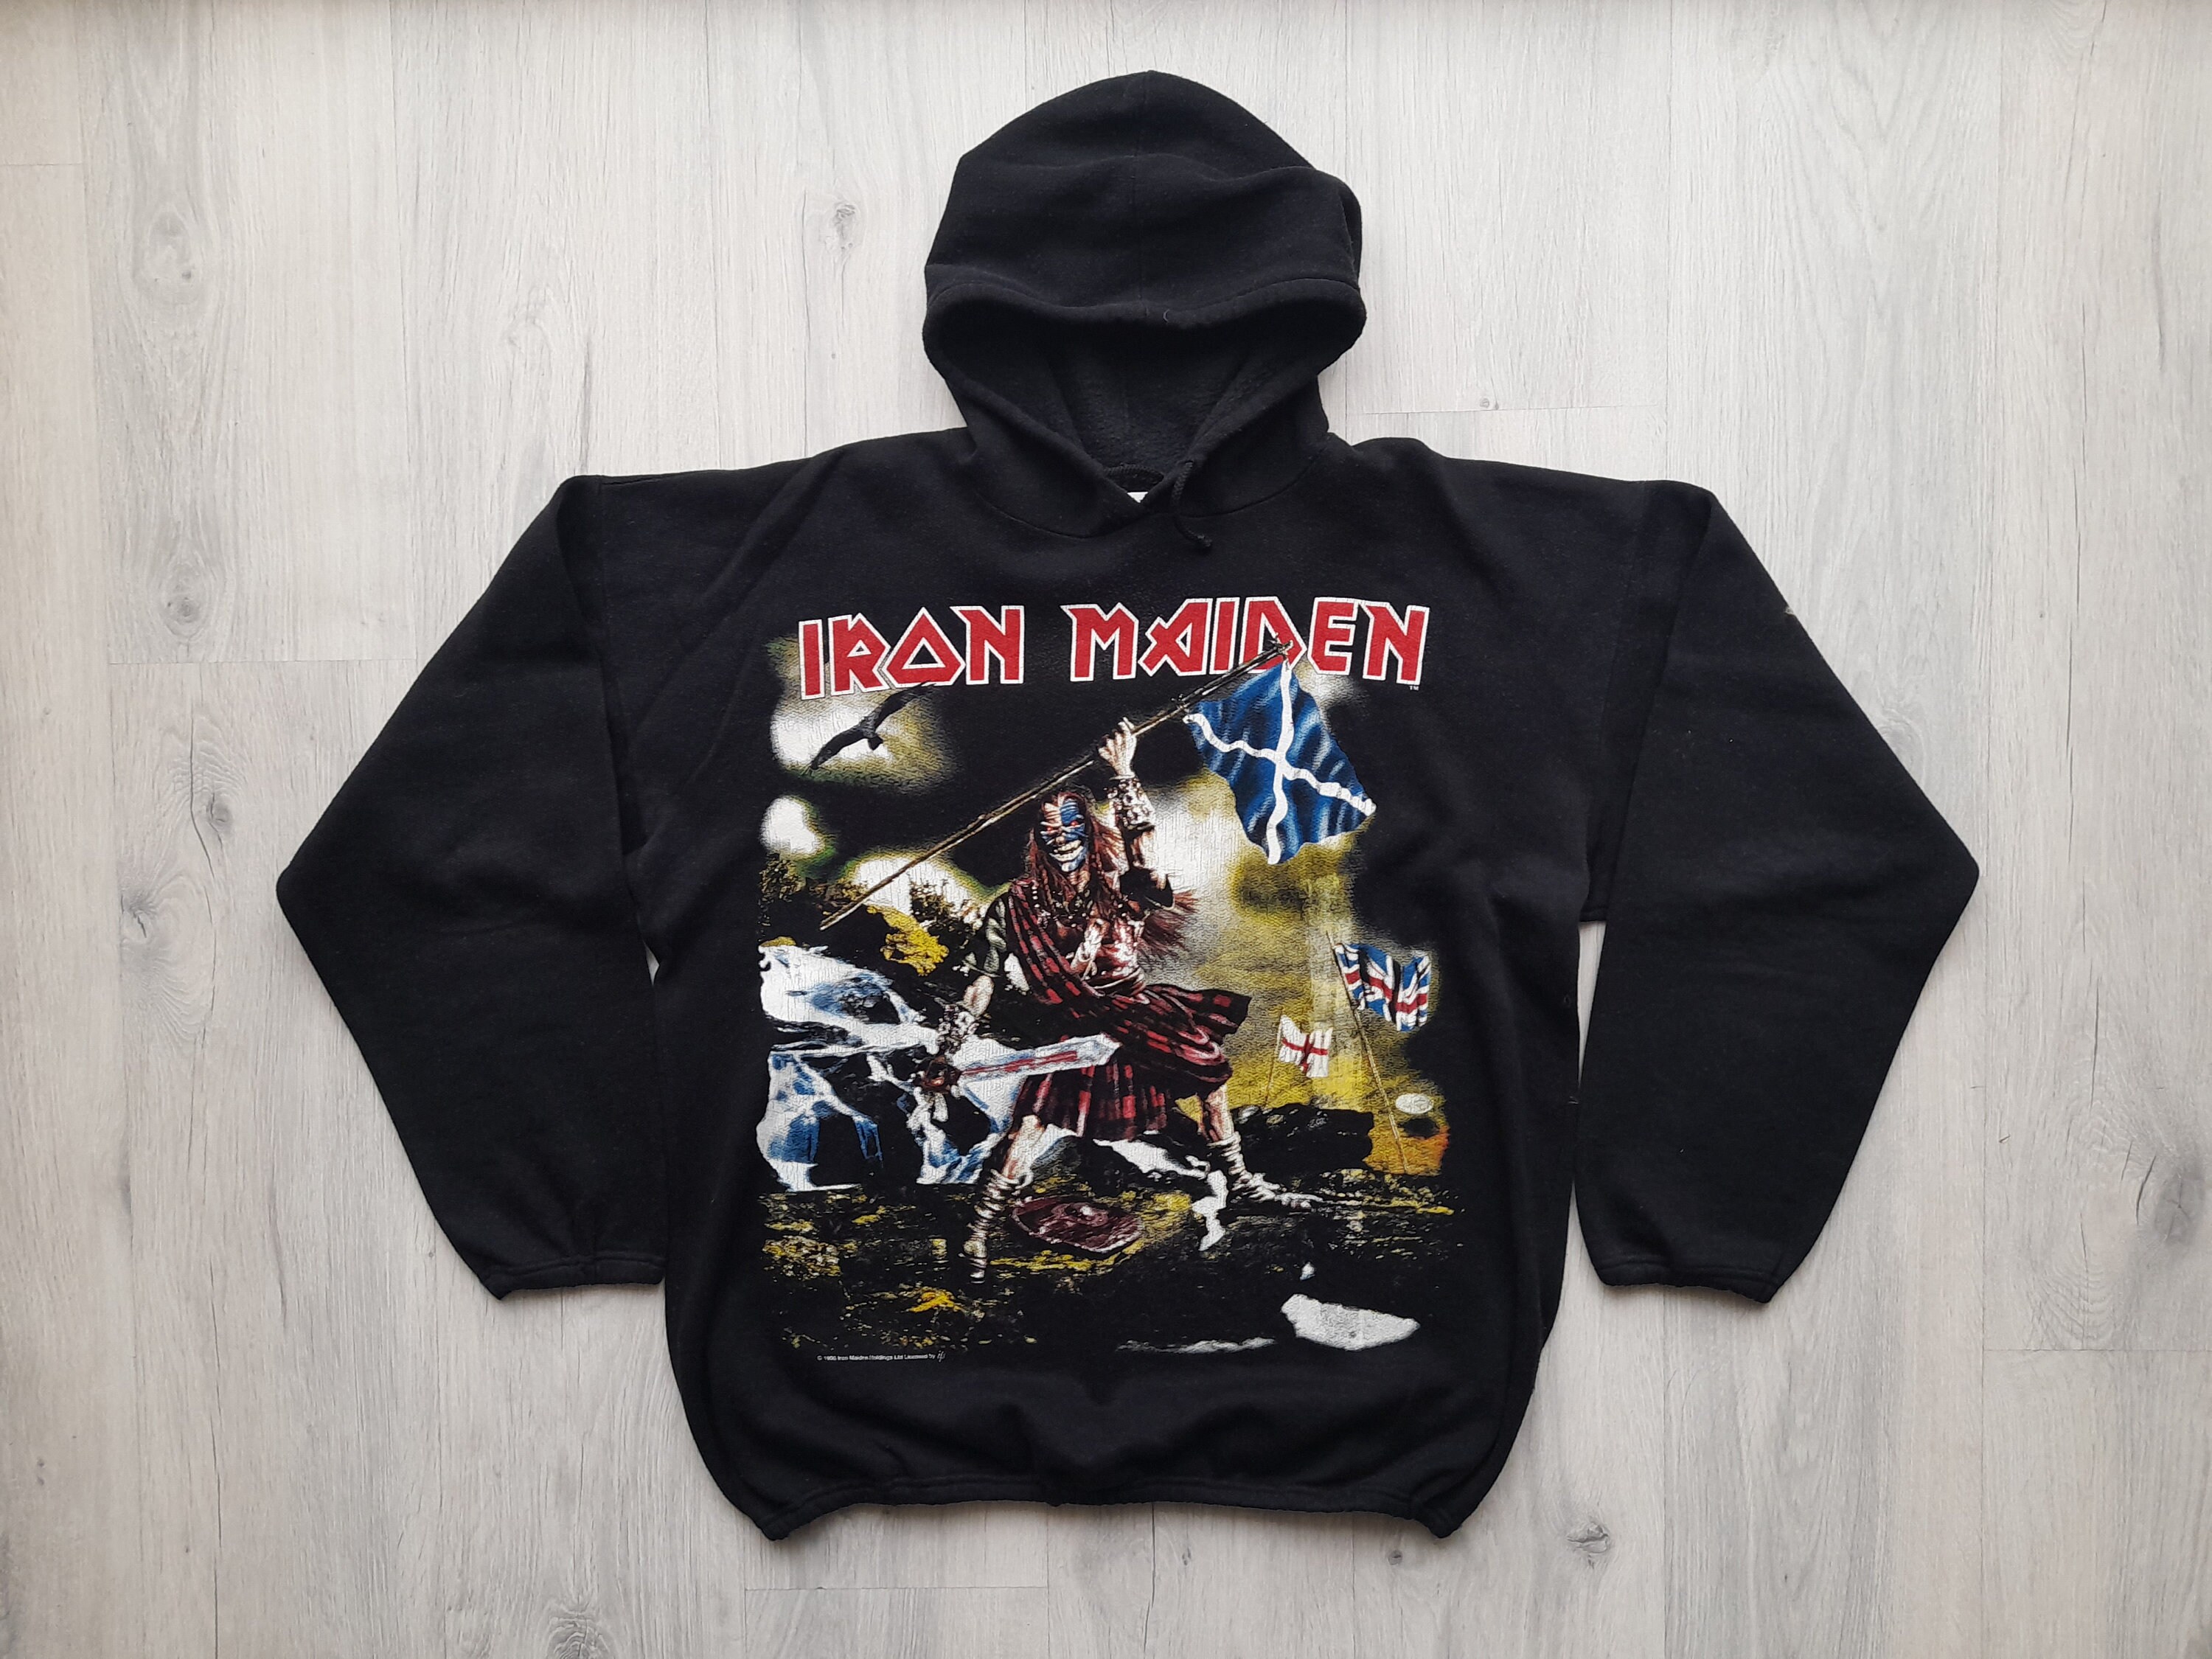 Vintage 1990s Iron Maiden Black Band T-shirt, Metal Collection